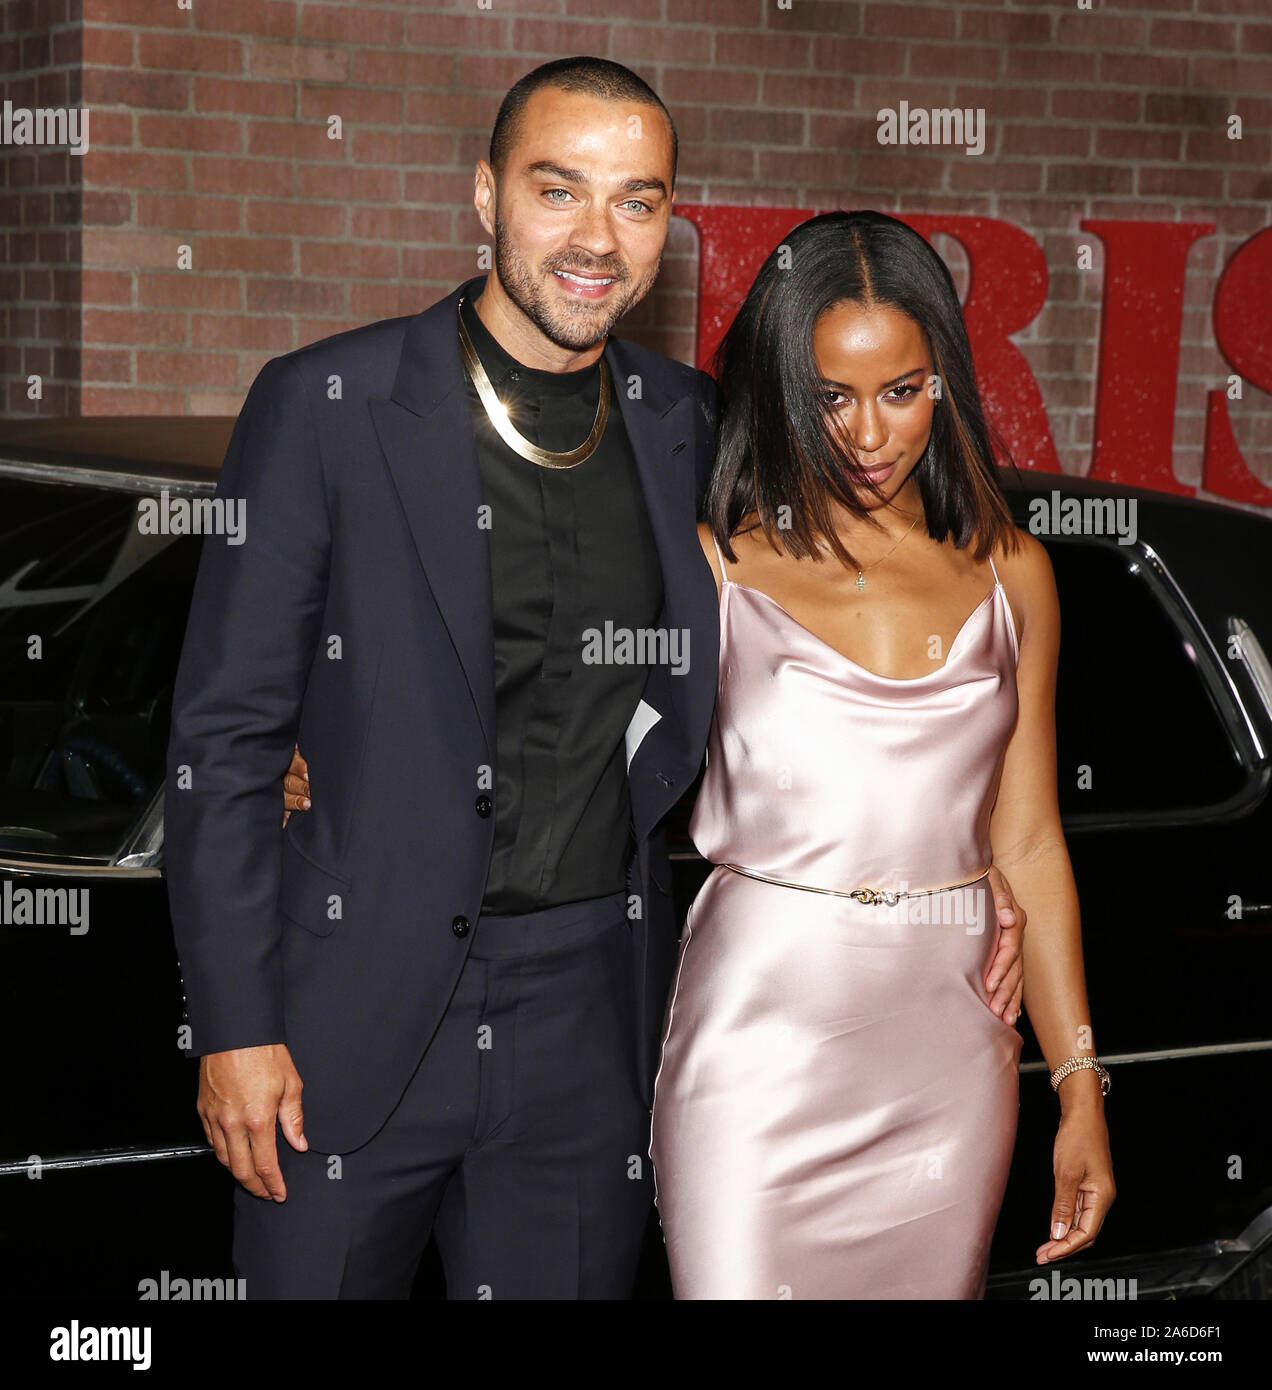 Los Angeles, CA - October 24, 2019: Jesse Williams and Taylour Paige arrive for the Premiere Of Netflix's 'The Irishman' held at TCL Chinese Theatre Stock Photo